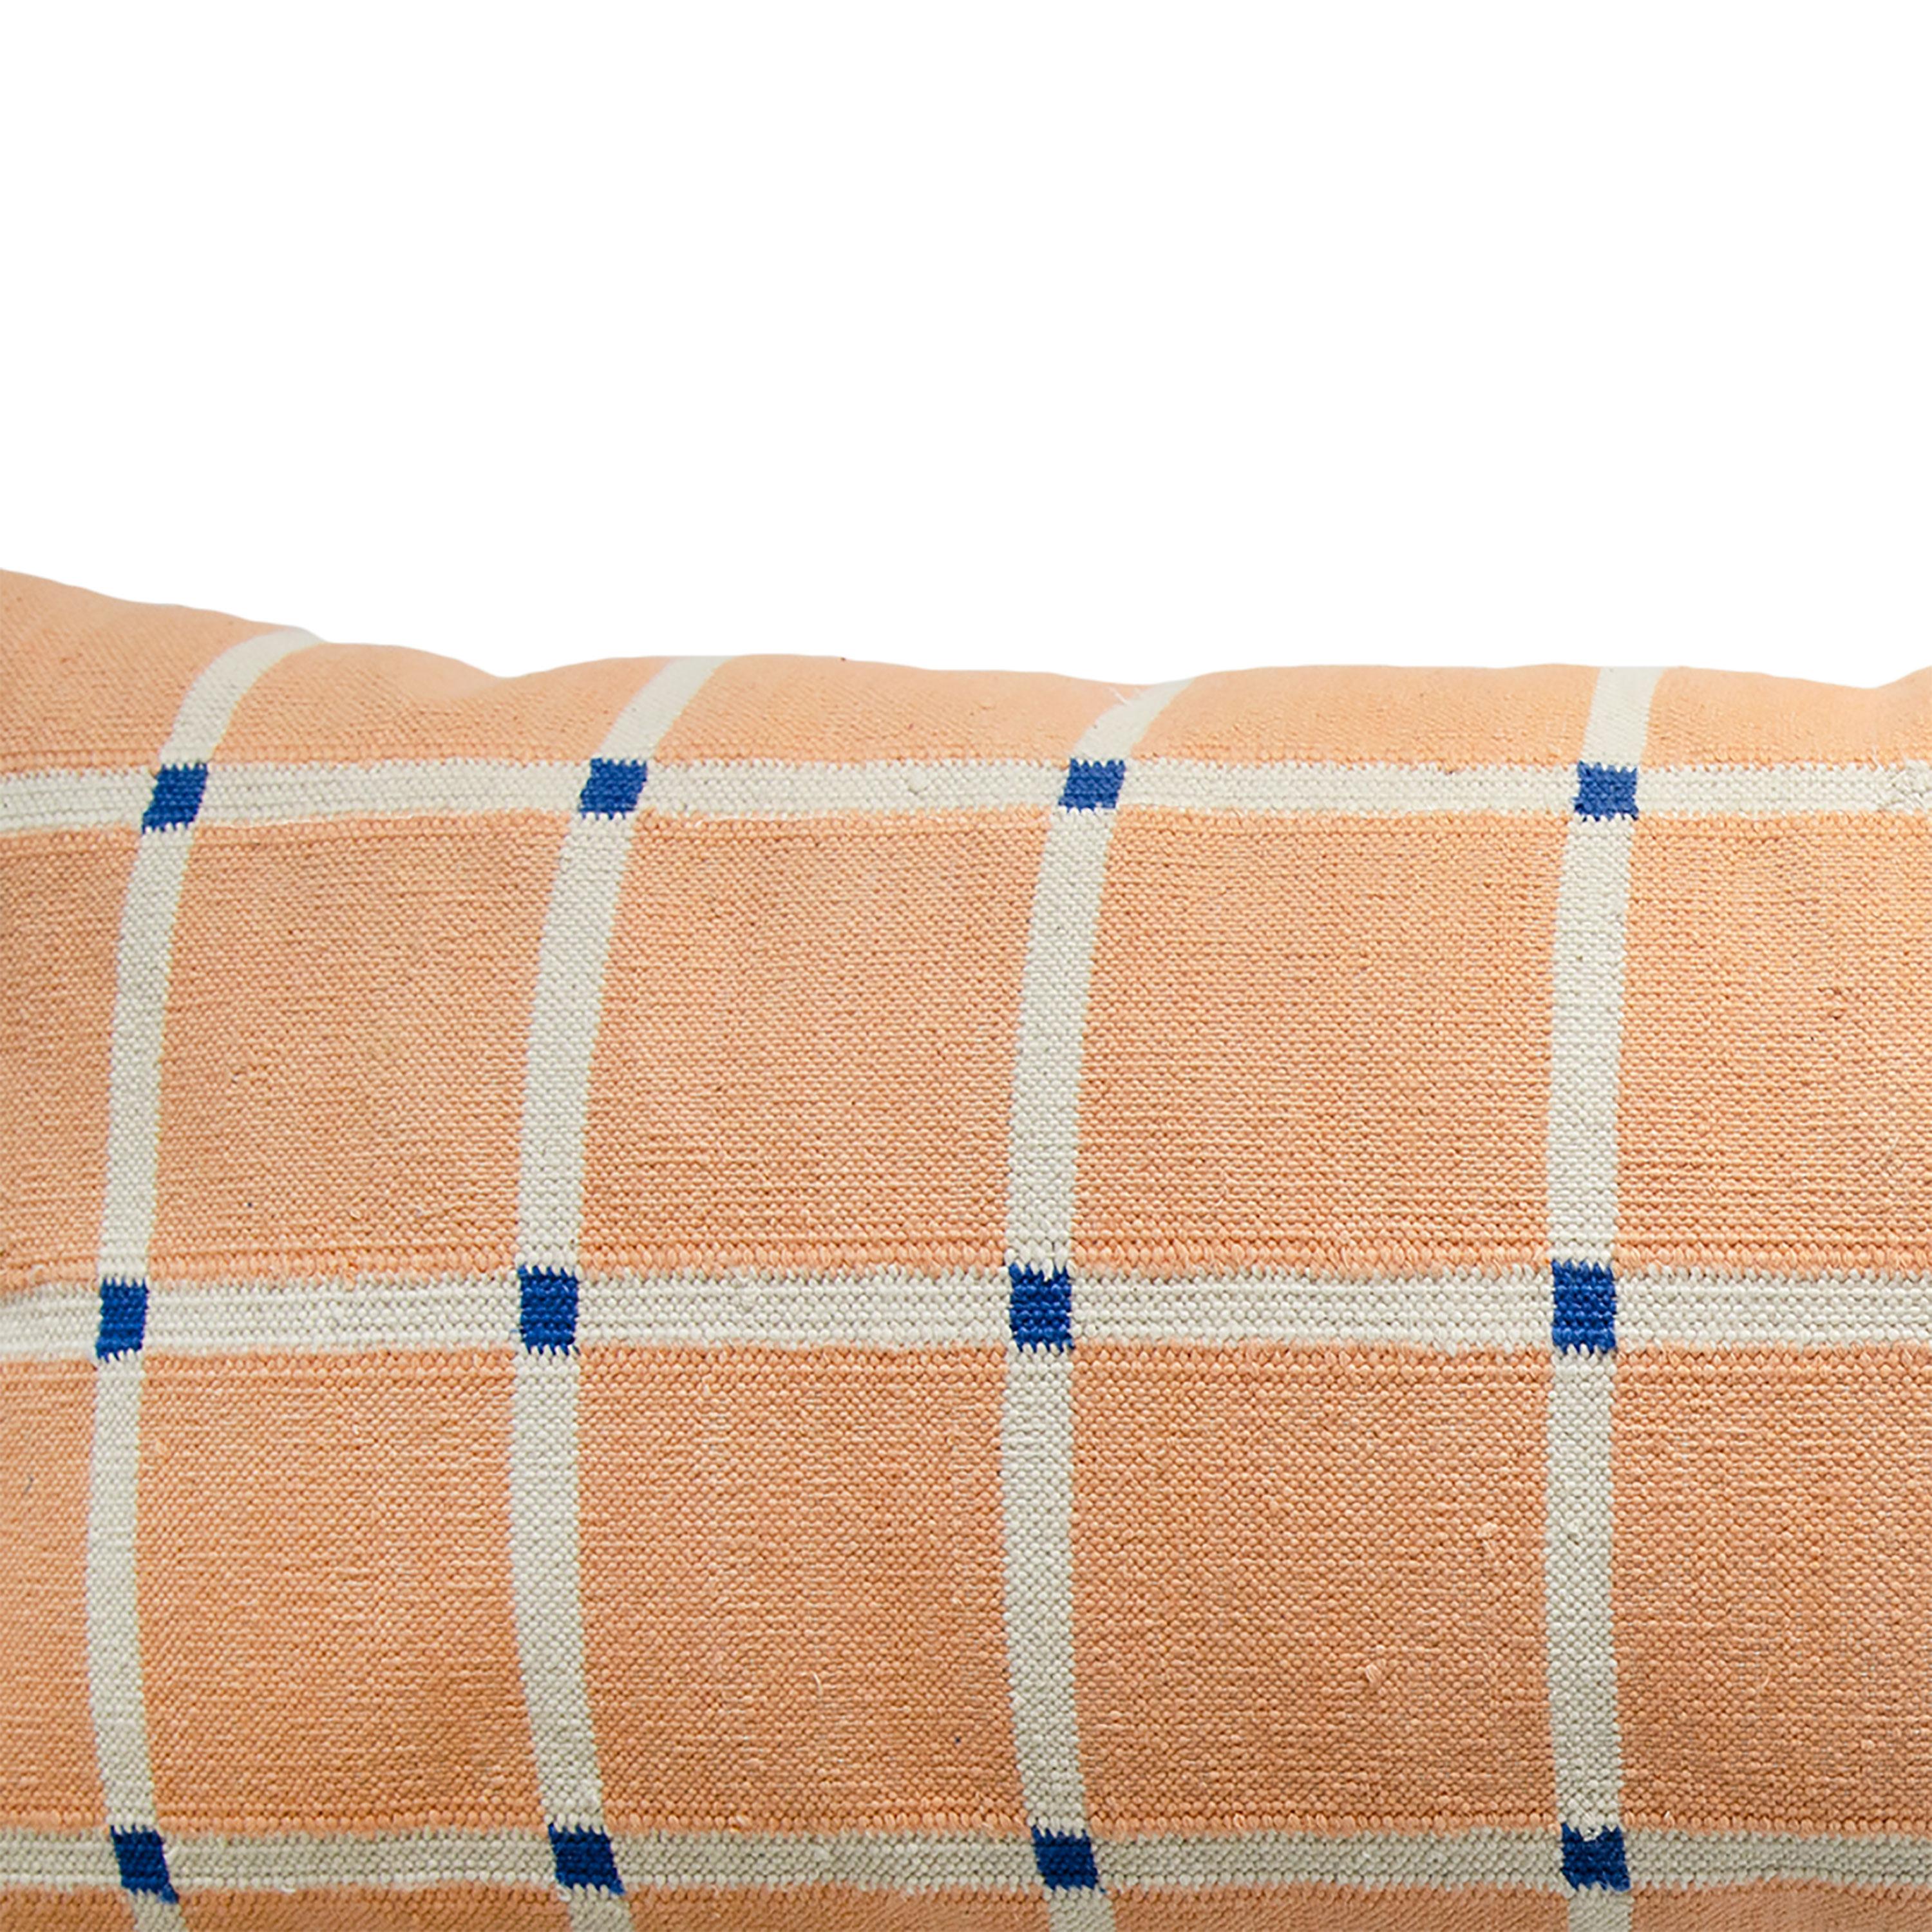 Our grid pillows are ethically hand woven by artisans in Rajasthan, India, using a traditional weaving technique which is native to this region.

The purchase of this handcrafted pillow helps to support the artisans and preserve their